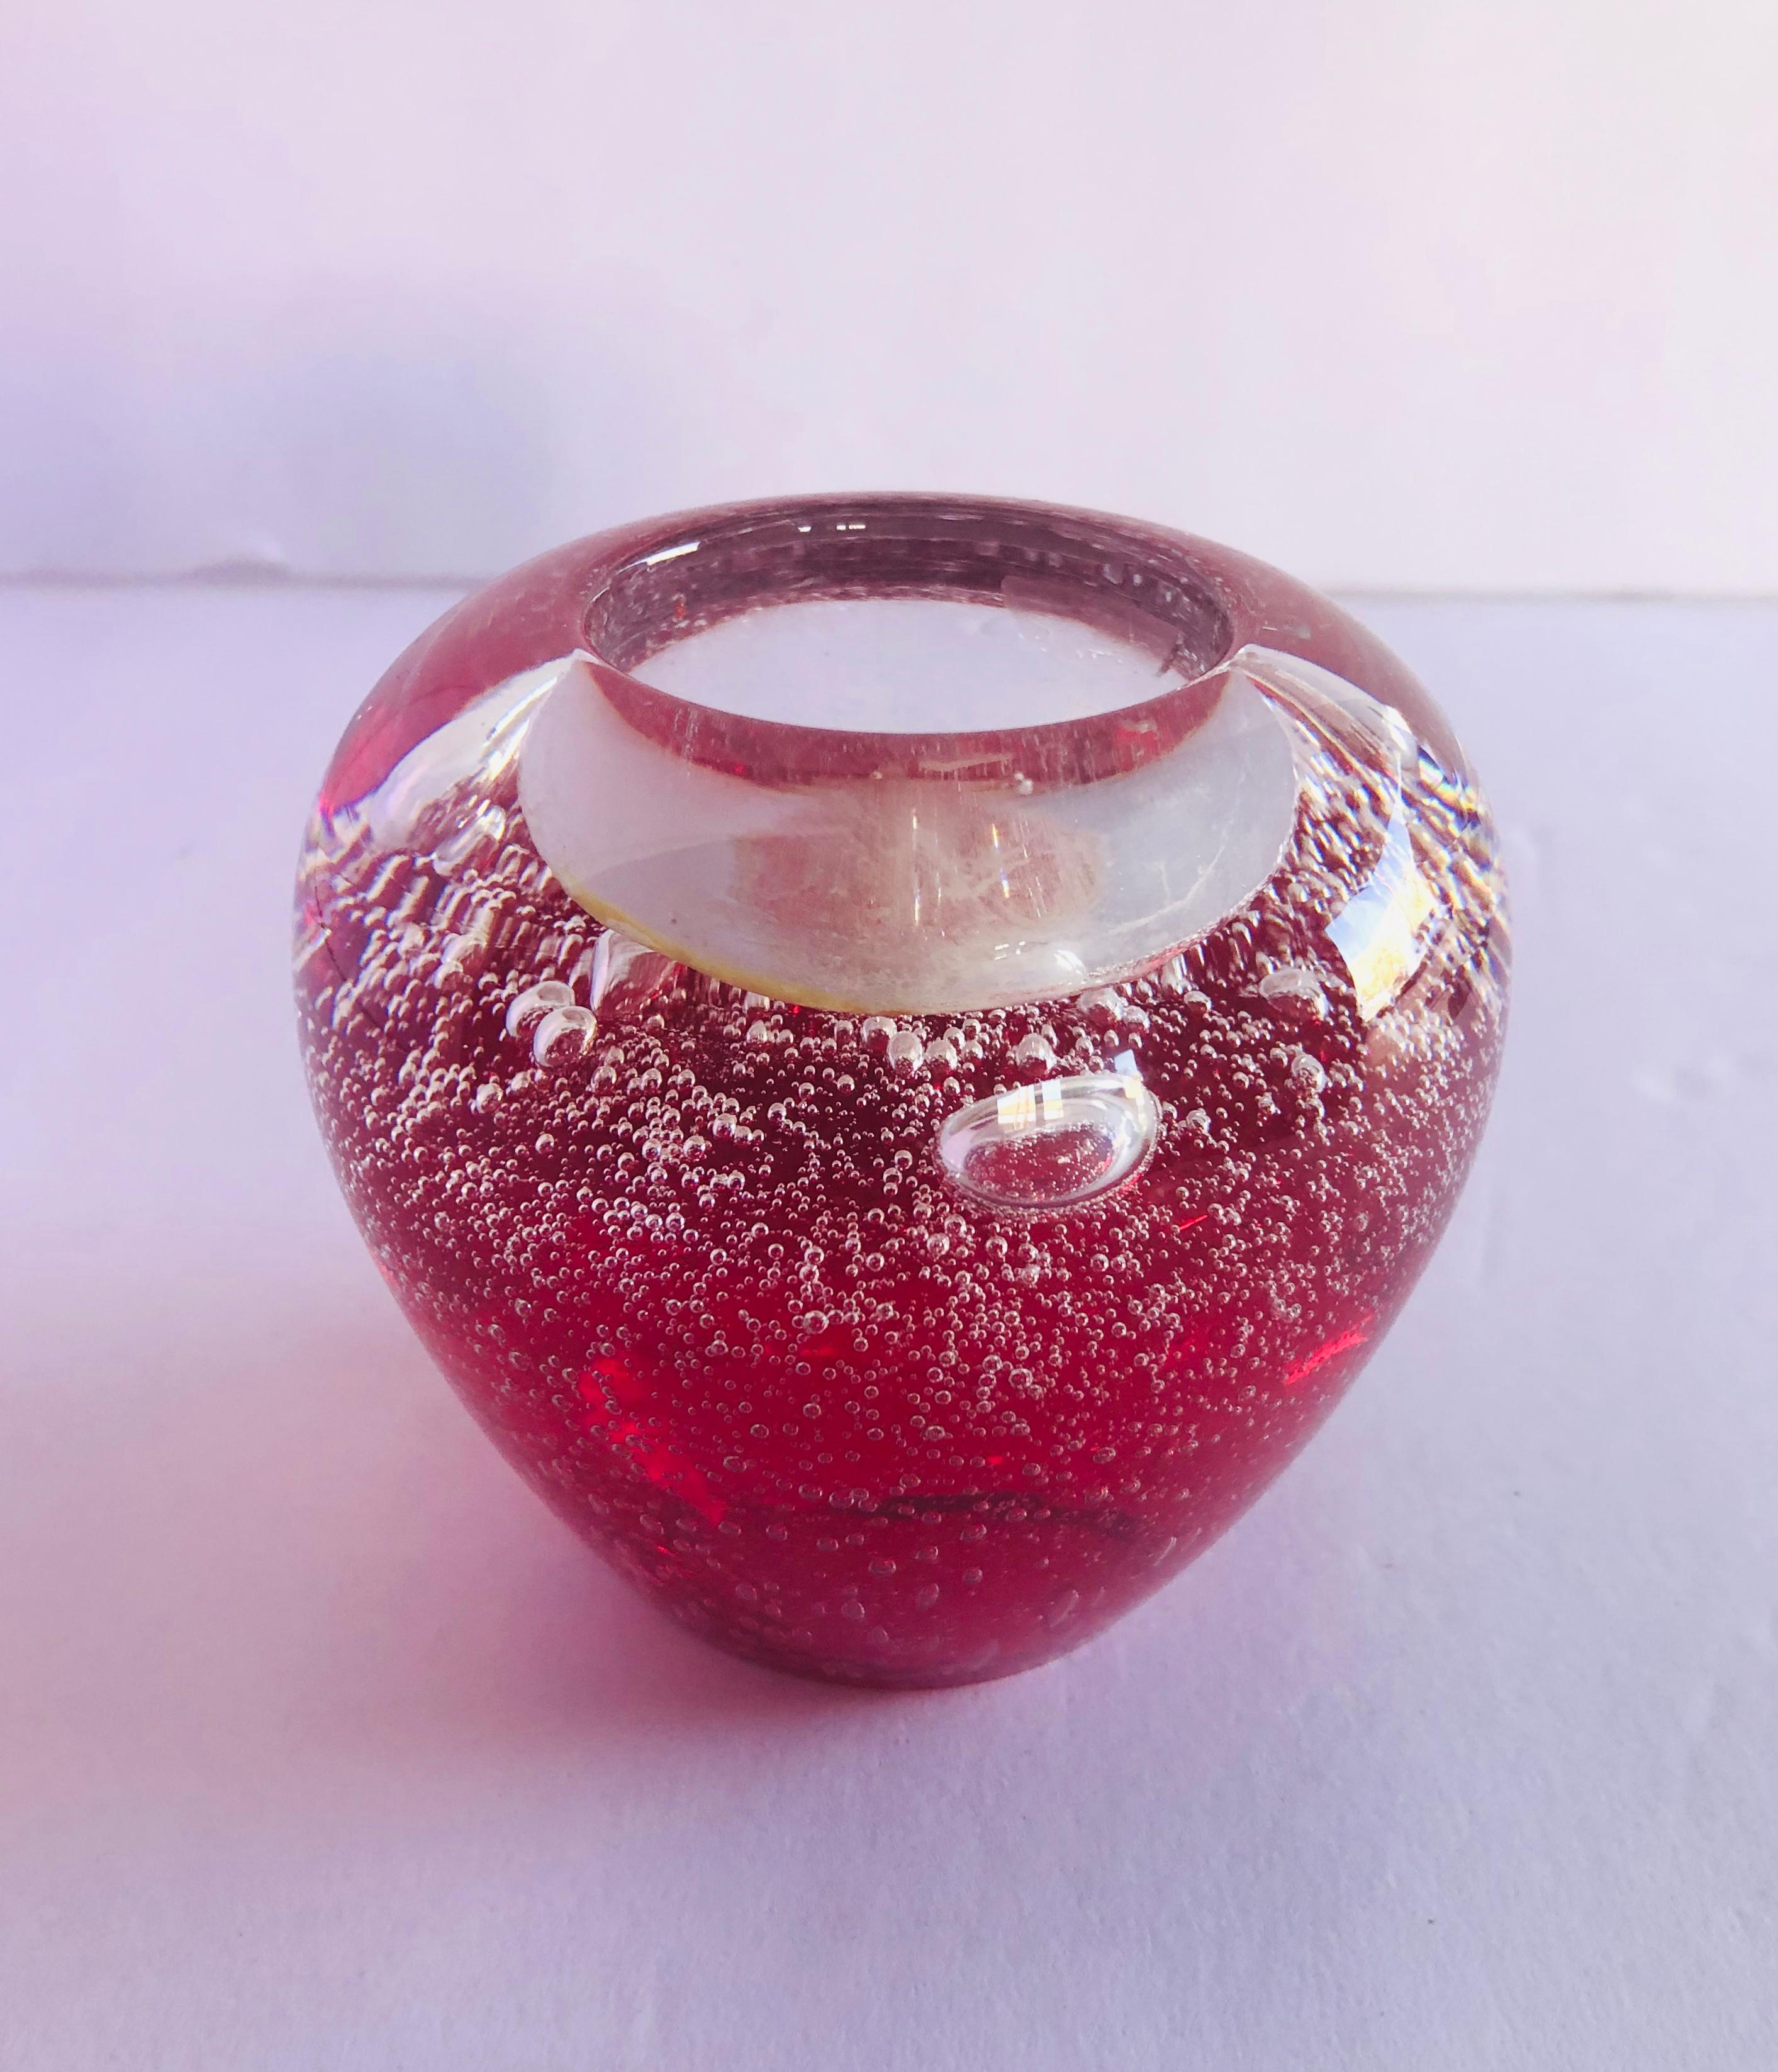 Vintage Italian red Murano glass tealight holder hand blown with bubbles inside the glass using Bollicine technique / Made in Italy, circa 1960s
Measures: Diameter 3.5 inches, height 3.25 inches
1 in stock in Palm Springs currently ON FINAL